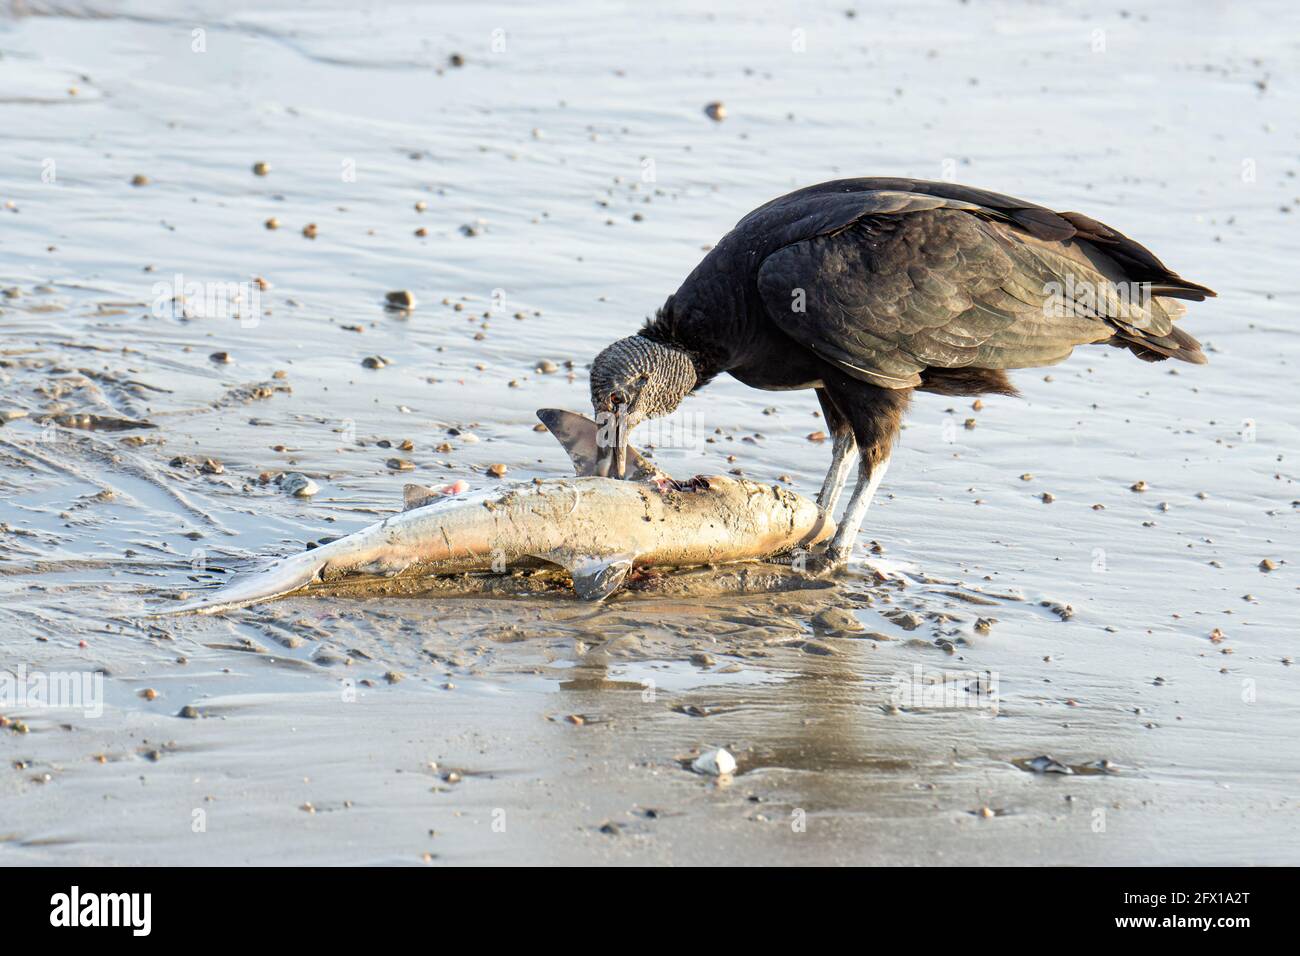 American black vulture eating a baby shark washed ashore at the ocean coast in Costa Rica Stock Photo